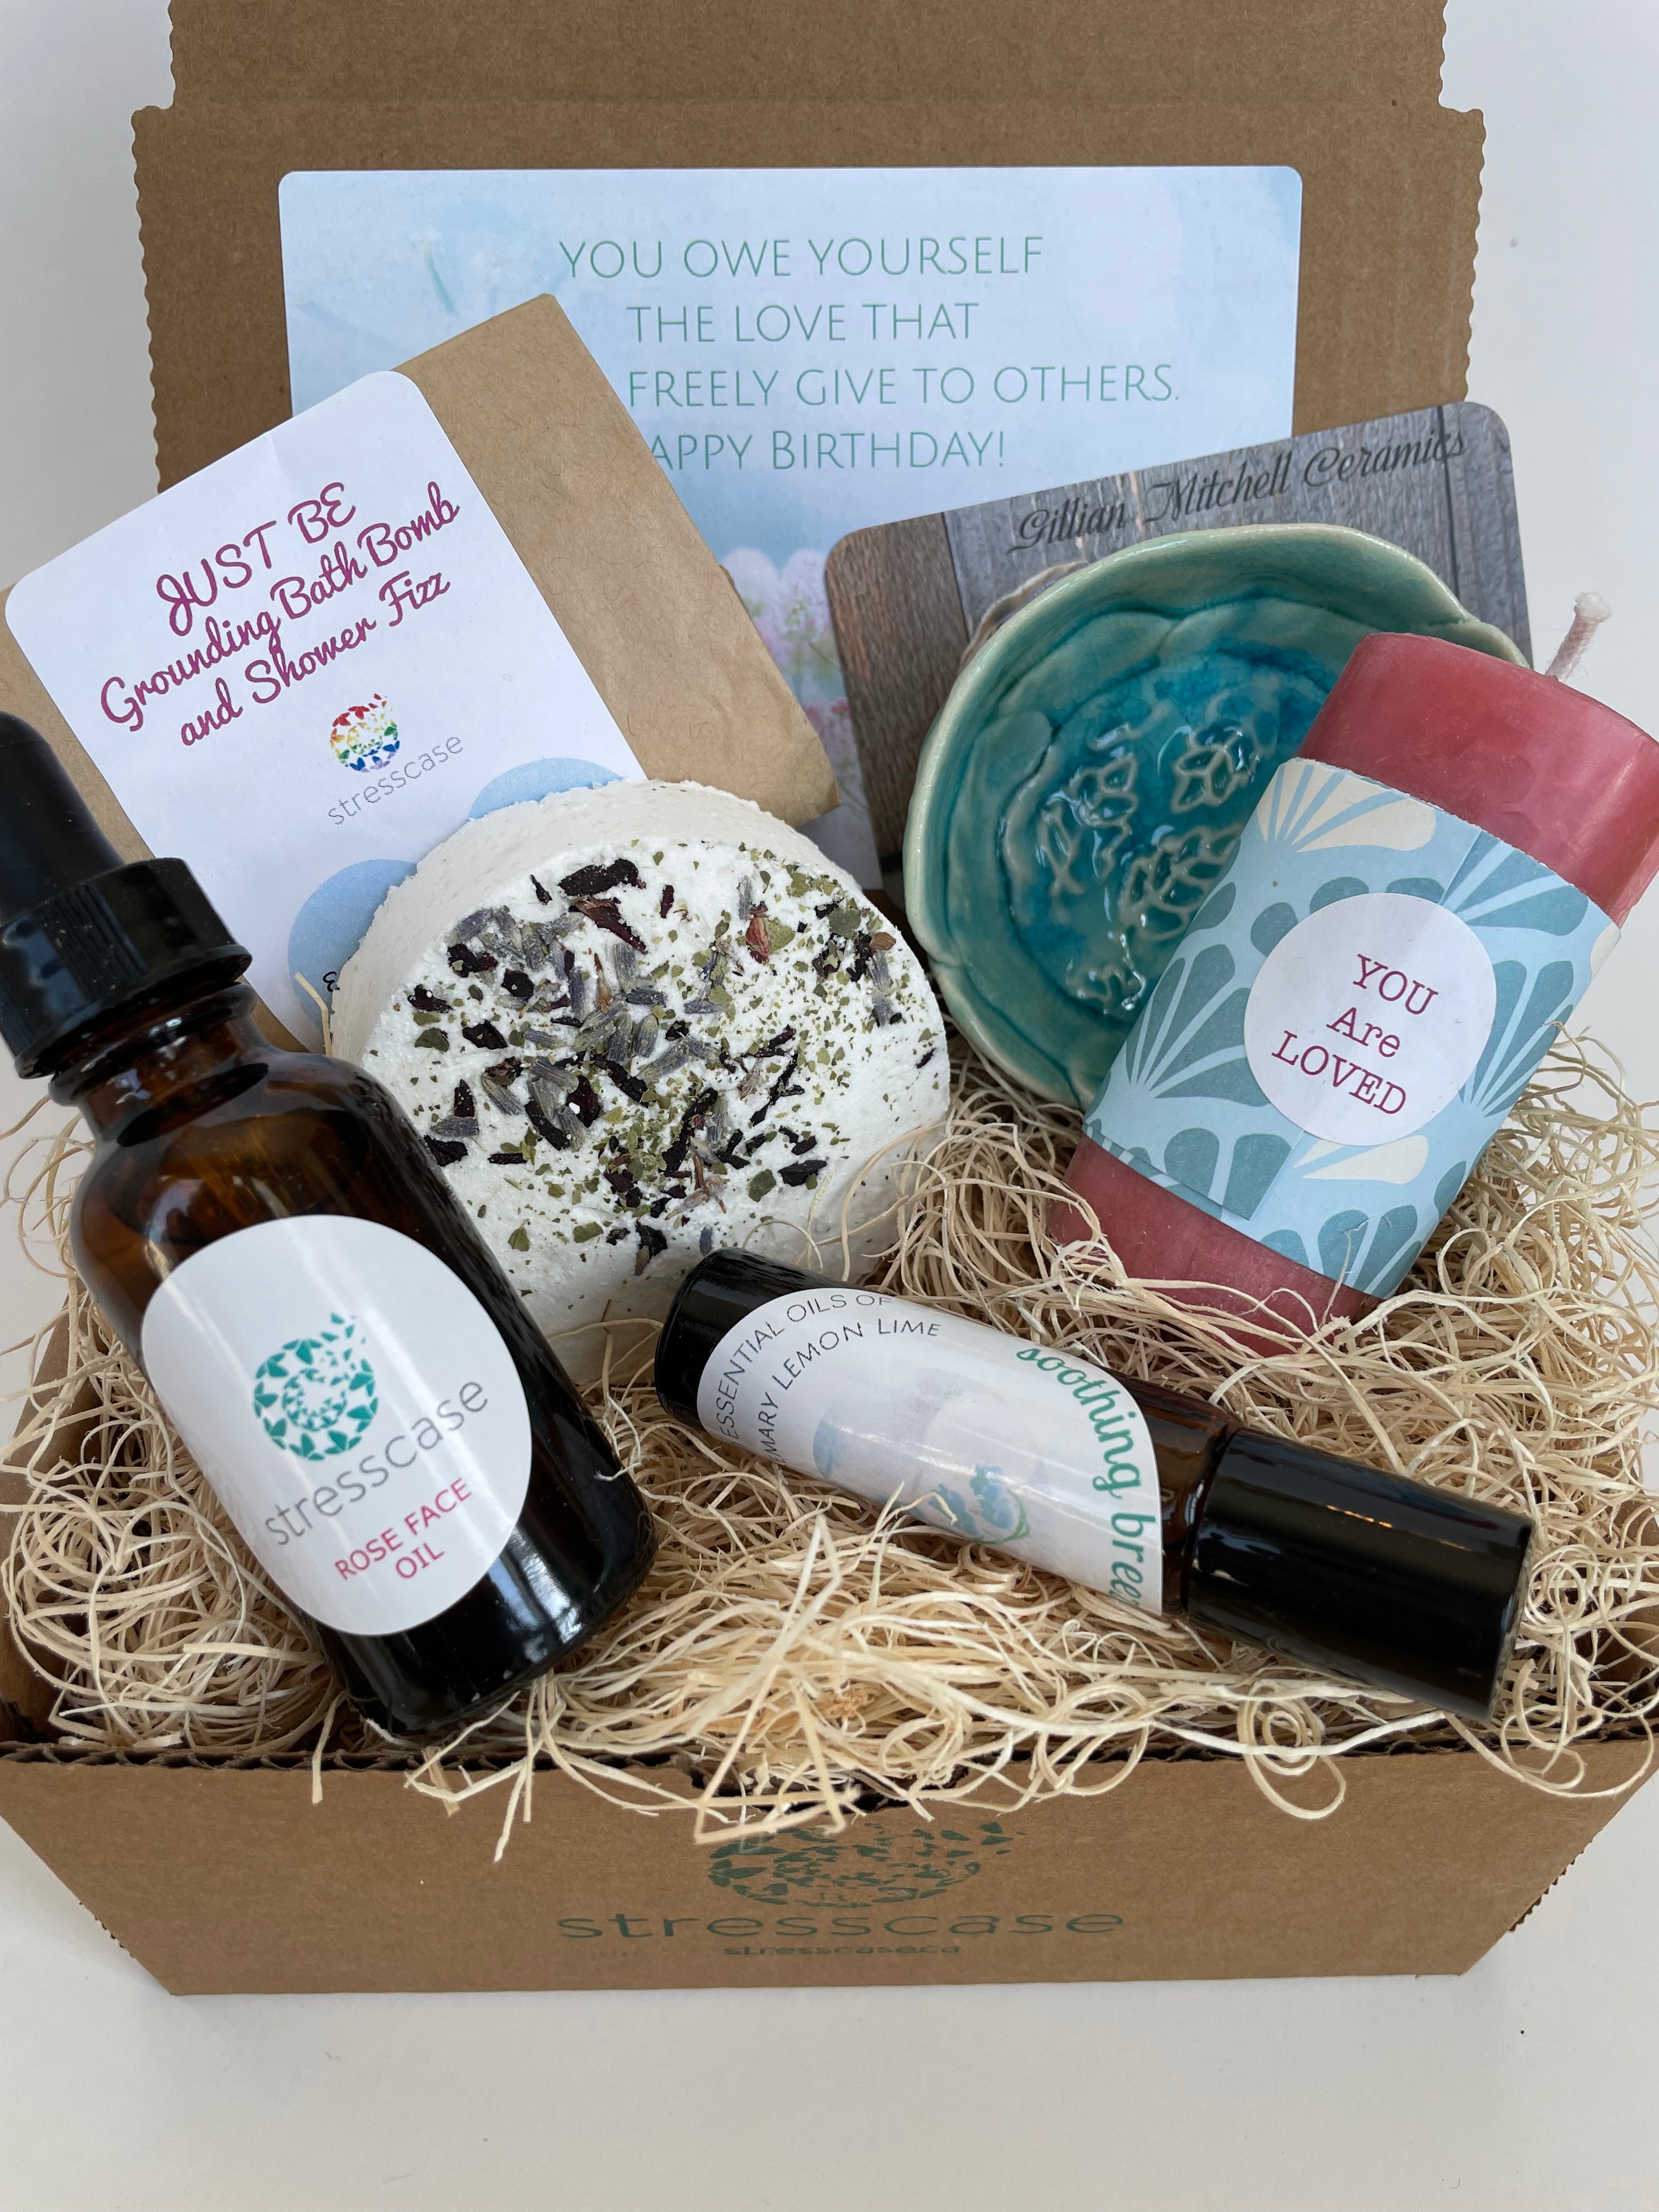 self-care kit locally curated in Alberta gift basket for mental health anxiety and stress relief.